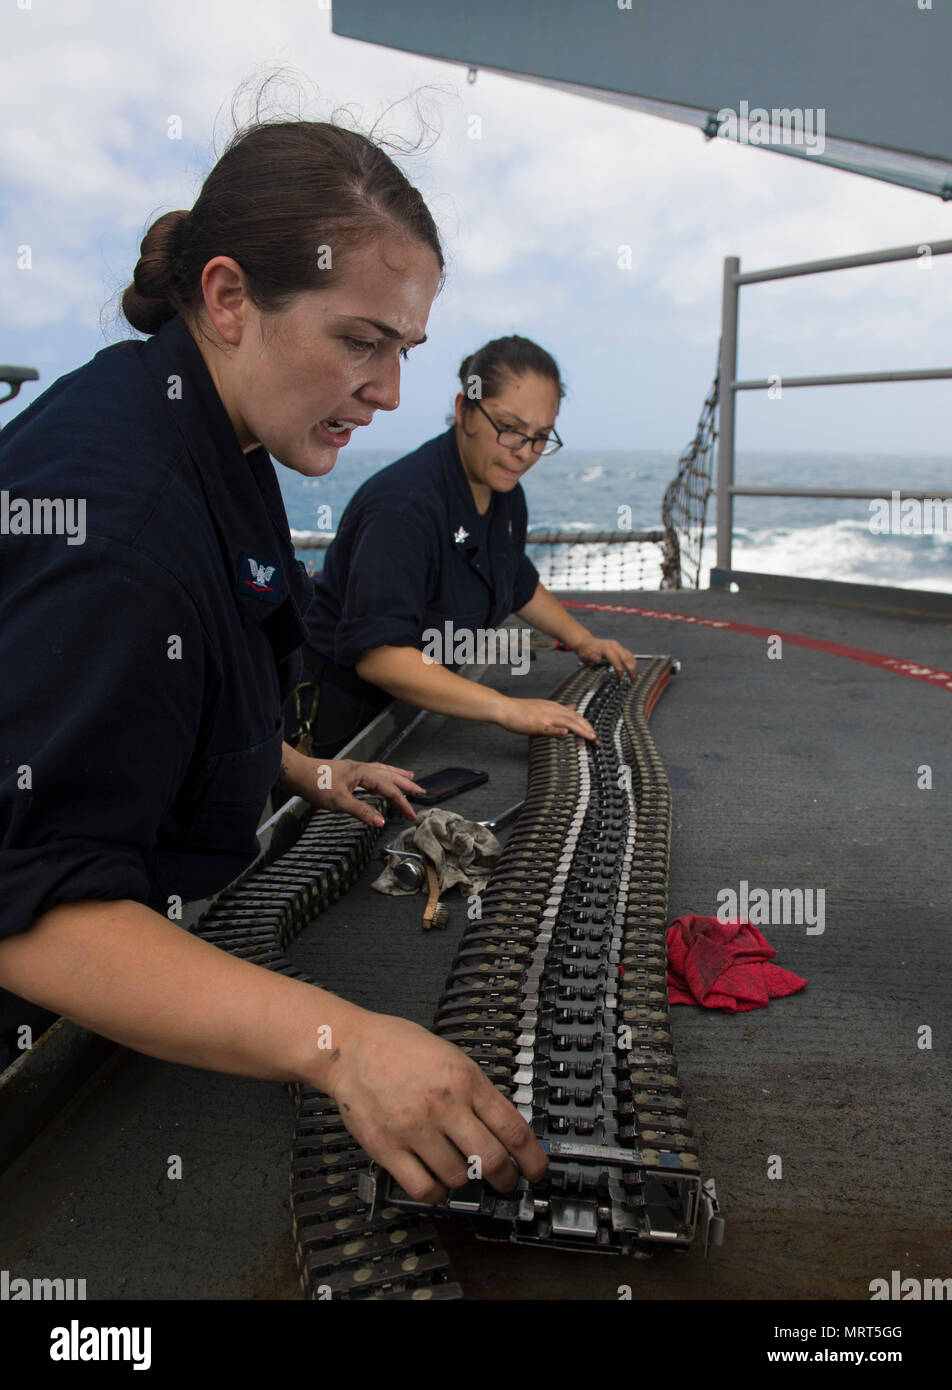 170624-N-TJ319-044  ATLANTIC OCEAN (June 24, 2017) Fire Controlman 2nd Class Harley Foskett, from San Antonio, Tx., and Fire Controlman 3rd Class Melissa Rivers, from Hot Springs, Ark., perform maintenance on a phalanx close-in weapon system aboard the aircraft carrier USS Dwight D. Eisenhower (CVN 69)(Ike). Ike is underway during the sustainment phase of the Optimized Fleet Response Plan (OFRP). (U.S. Navy photo by Mass Communication Specialist Seaman Jessica L. Dowell) Stock Photo